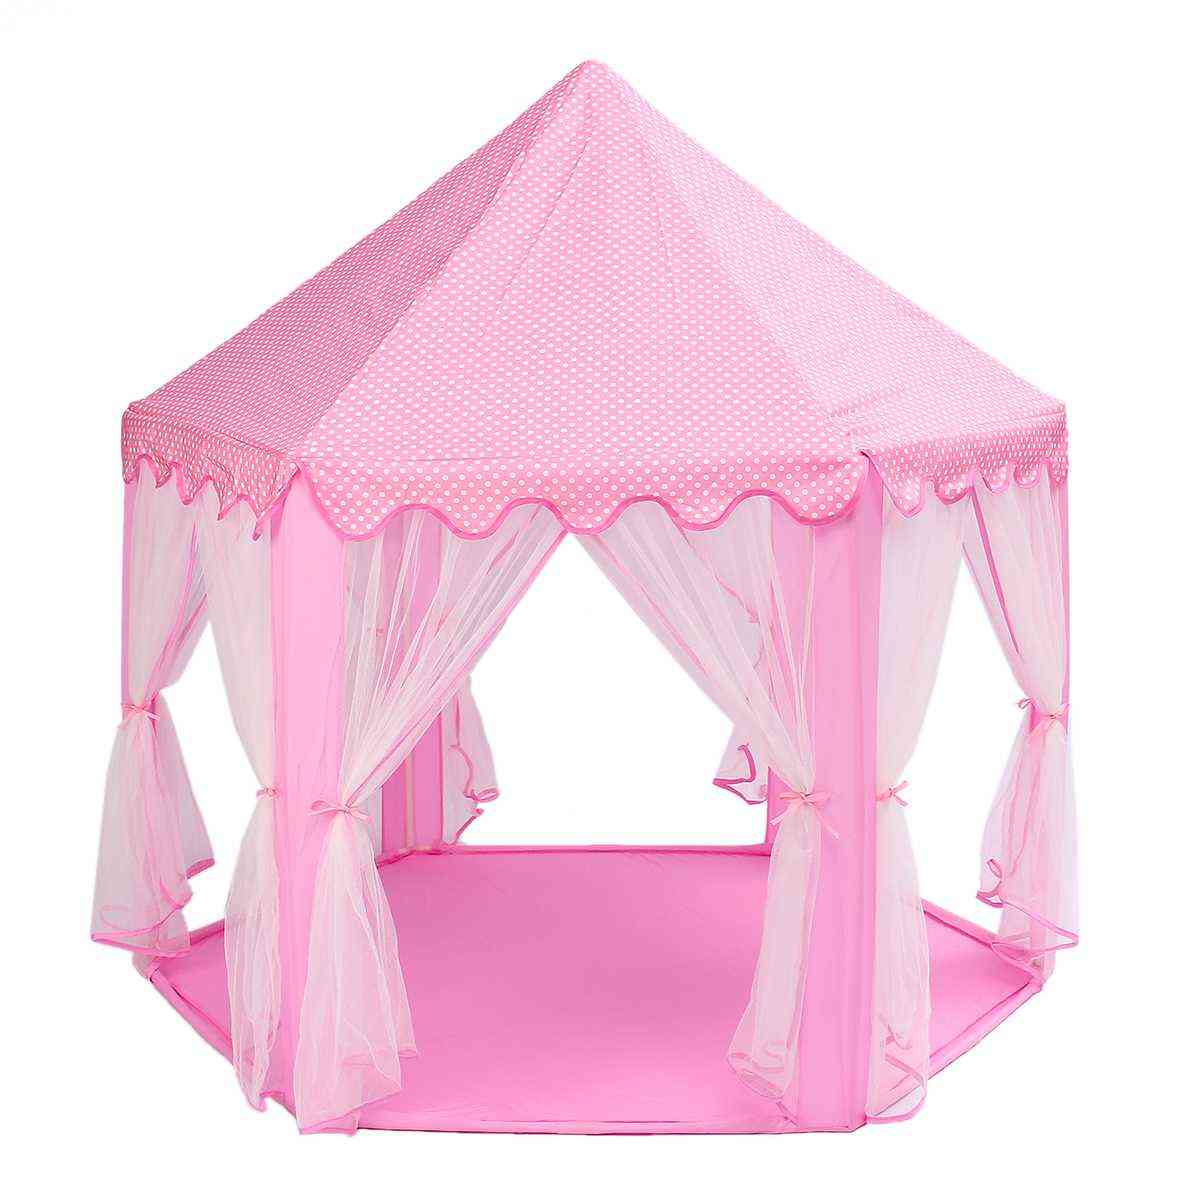 Portable Princess Castle- Play Tent With Rods